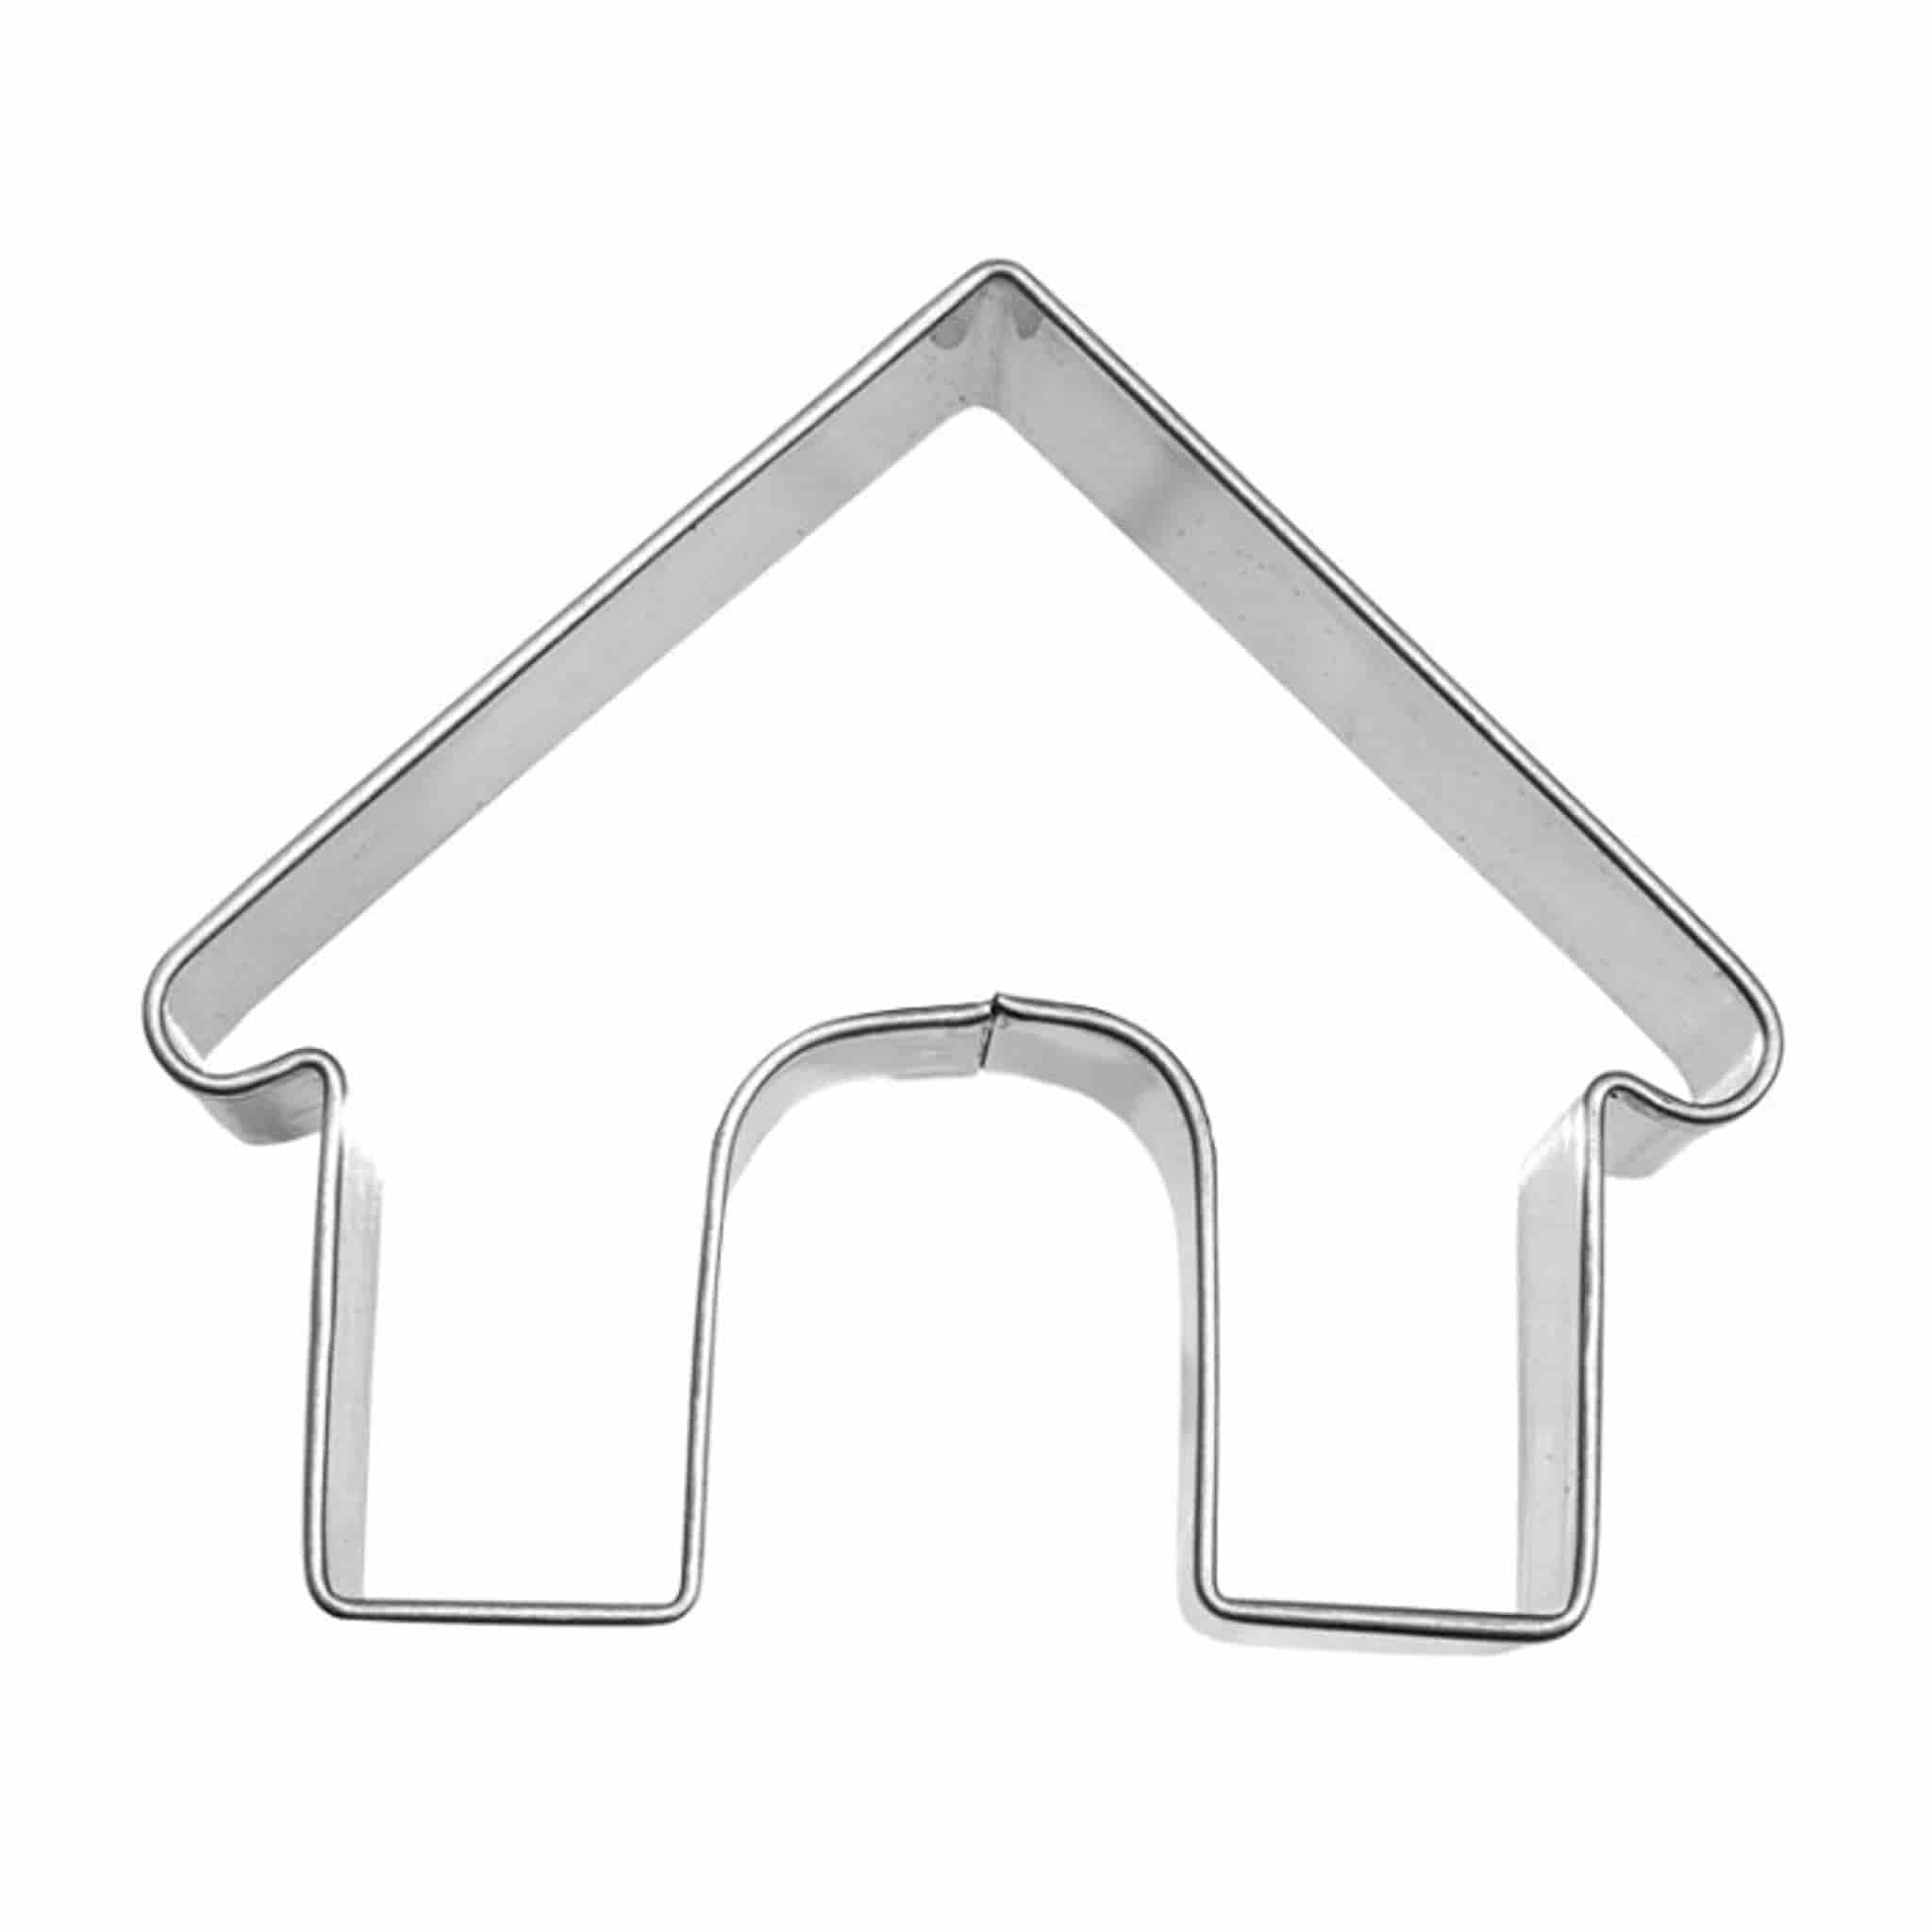 Stainless Steel Dog House Cookie Cutter, 6cm